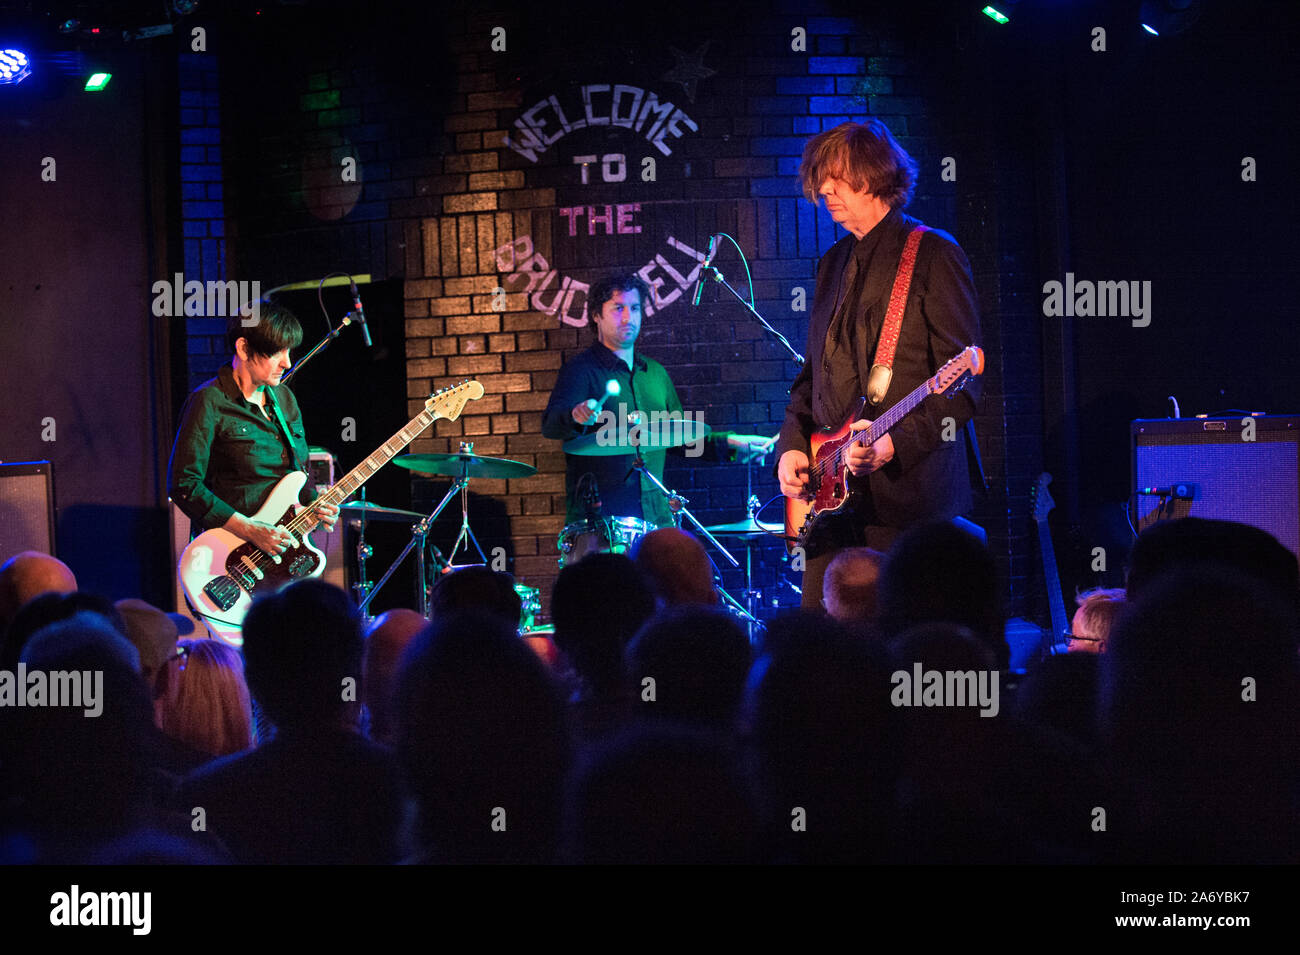 The Thurston Moore Group in concert at Brudenell Social Club, Leeds, UK, 16th October 2019. Thurston Moore with guitar on right. Debbie Googe on bass on left. Stock Photo